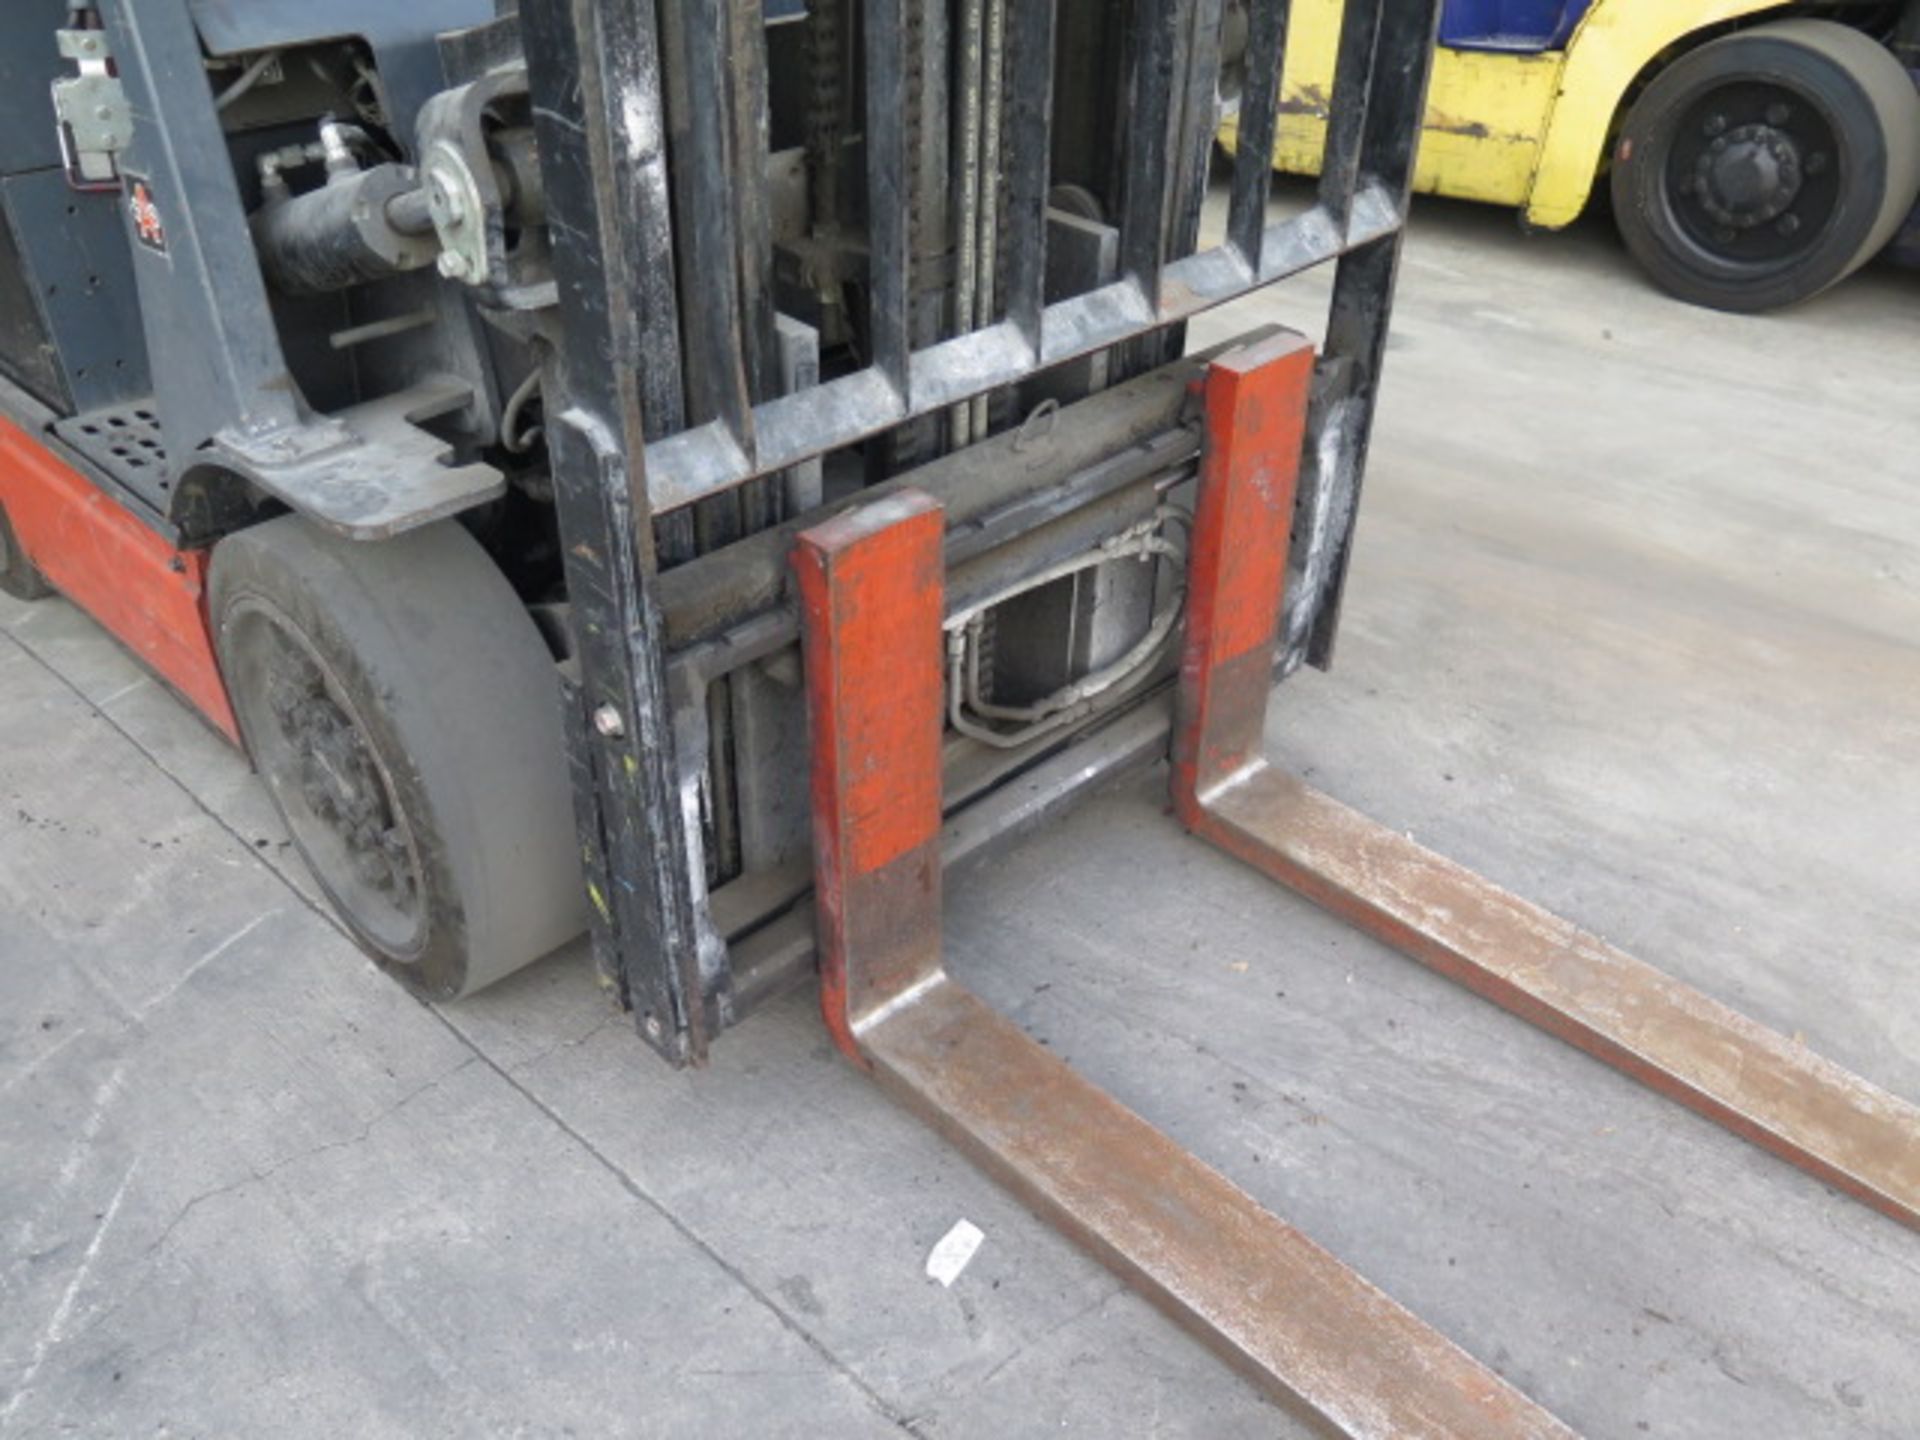 Toyota 8FBCU25 5000 Lb Cap Electric Forklift s/n 64087 w/ 3-Stage Mast, 198” Lift Height, Side - Image 4 of 12